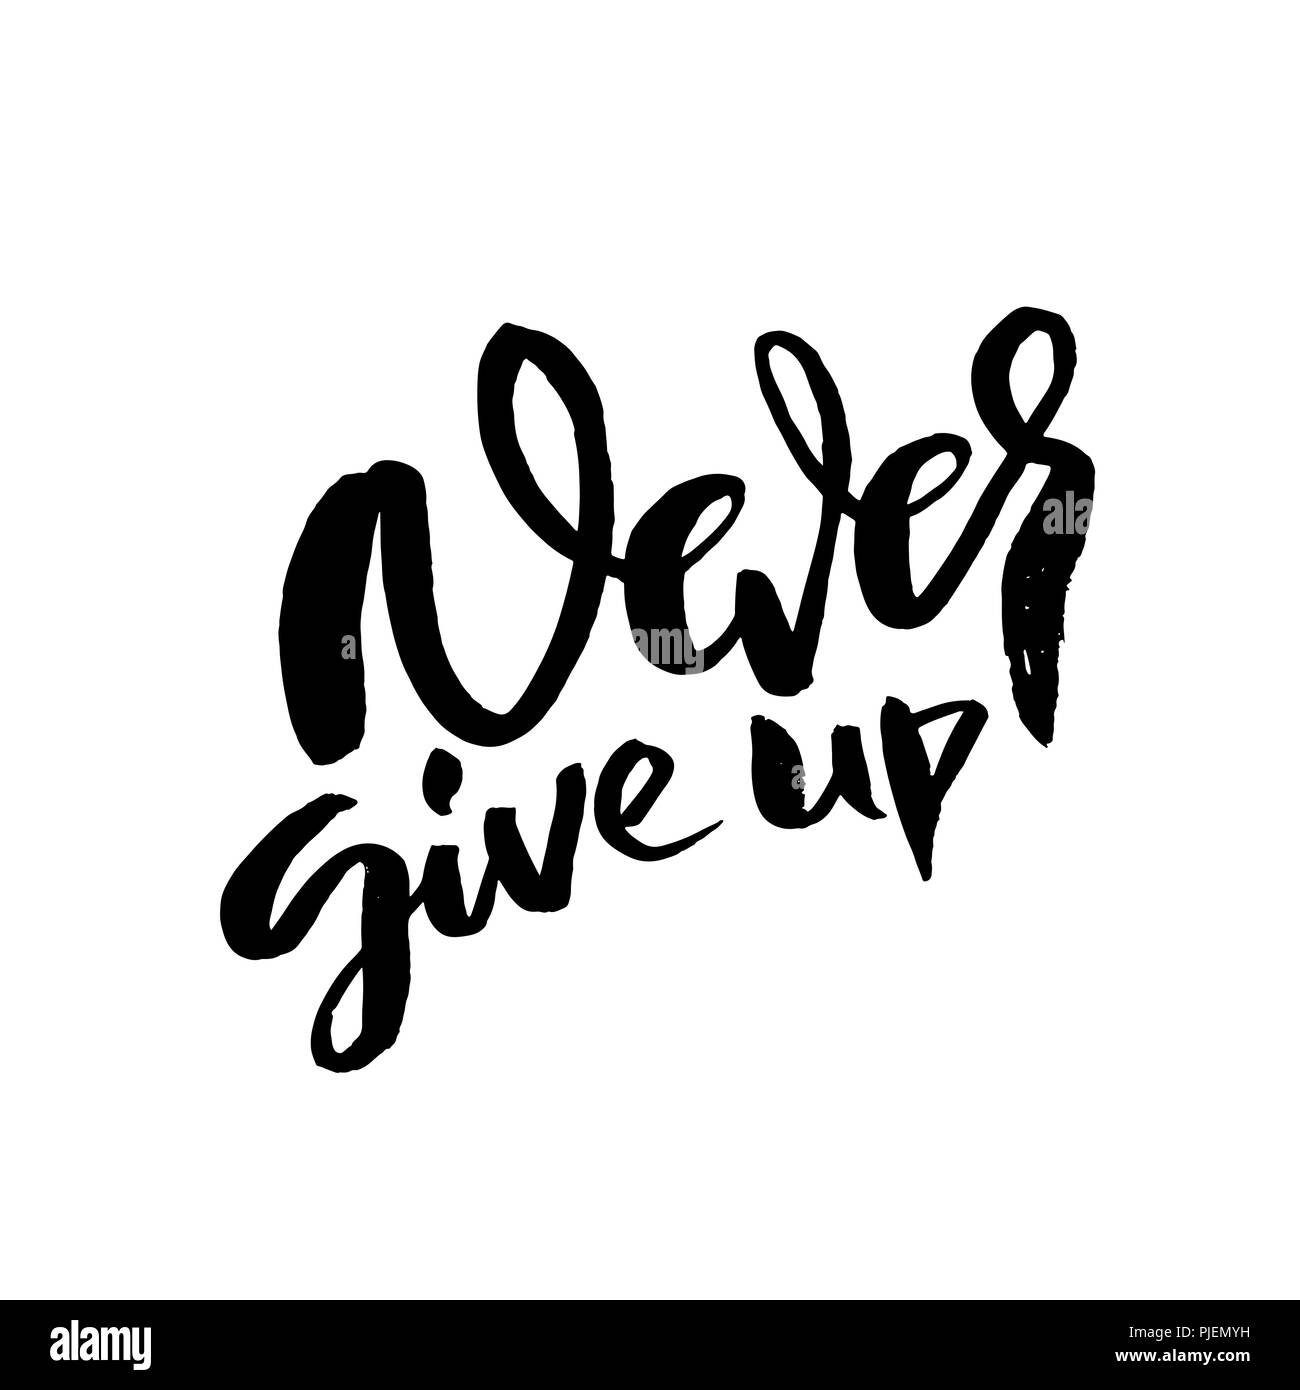 Never give up. Hand drawn modern brush lettering. Typography banner ...